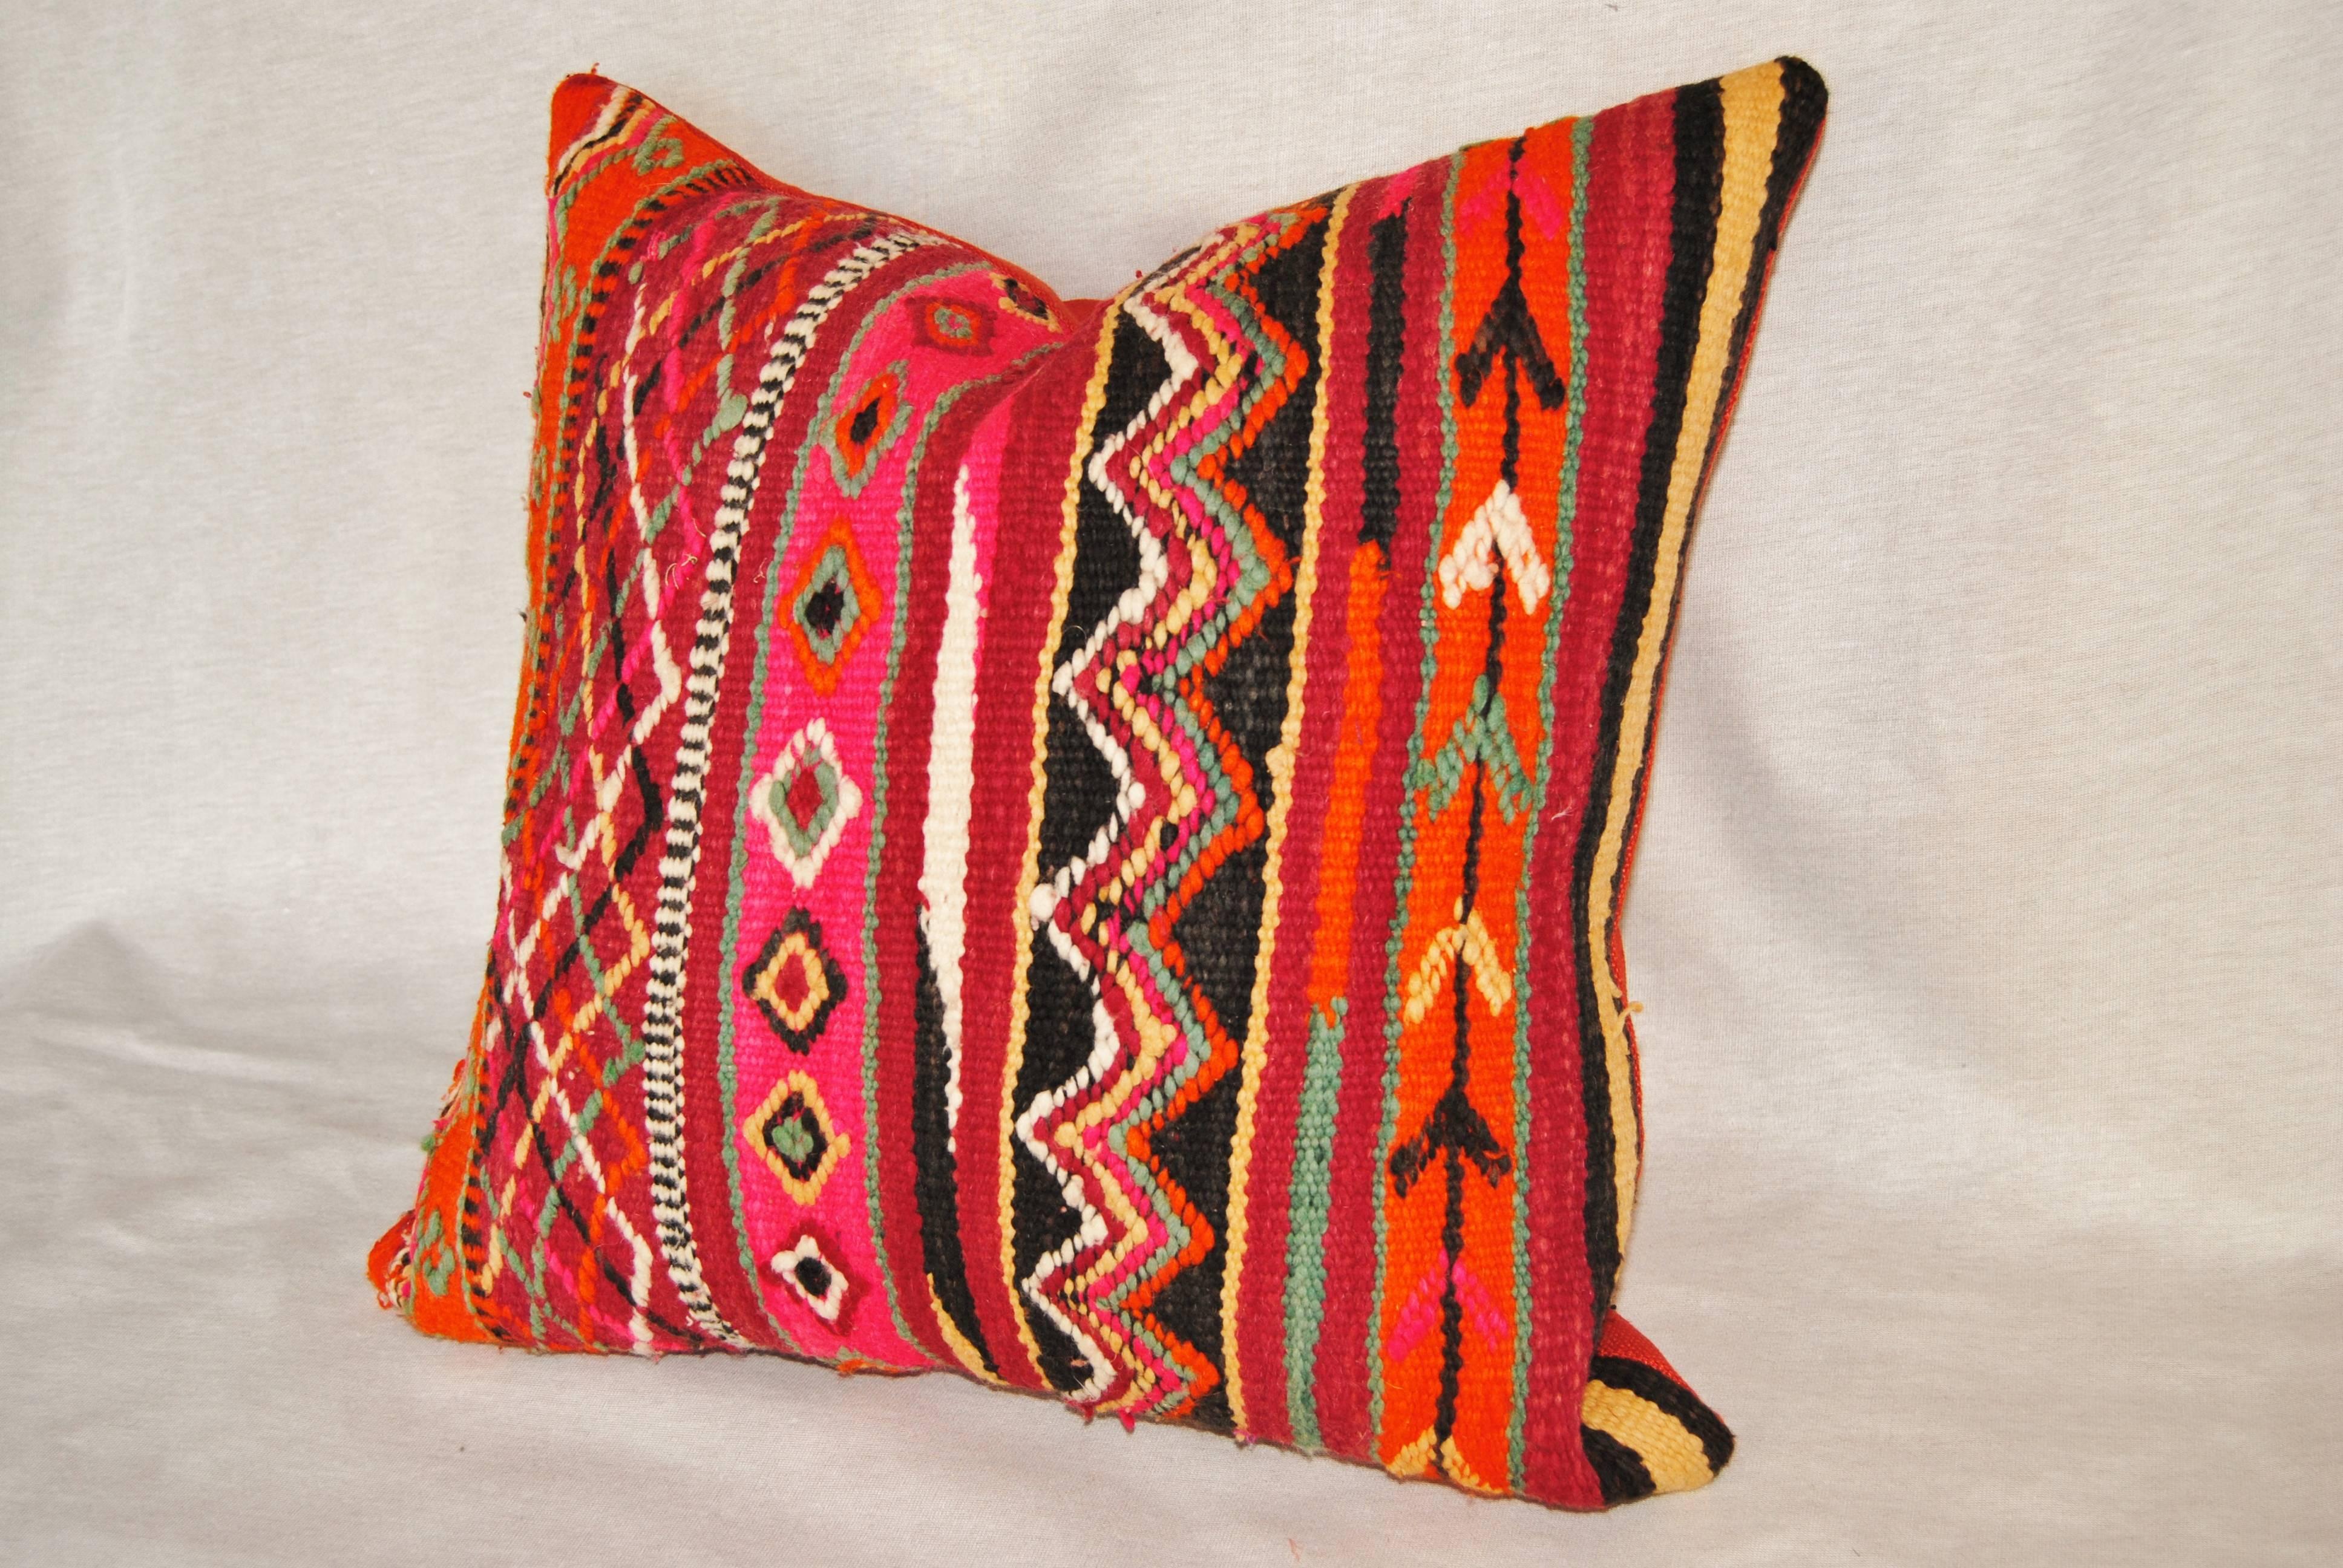 Custom pillow cut from a vintage hand loomed wool Moroccan Berber rug from the Atlas Mountains. Wool is soft and lustrous with vivid colored tribal designs. Pillow is backed in an orange/red linen, filled with an insert of 50/50 down and feathers